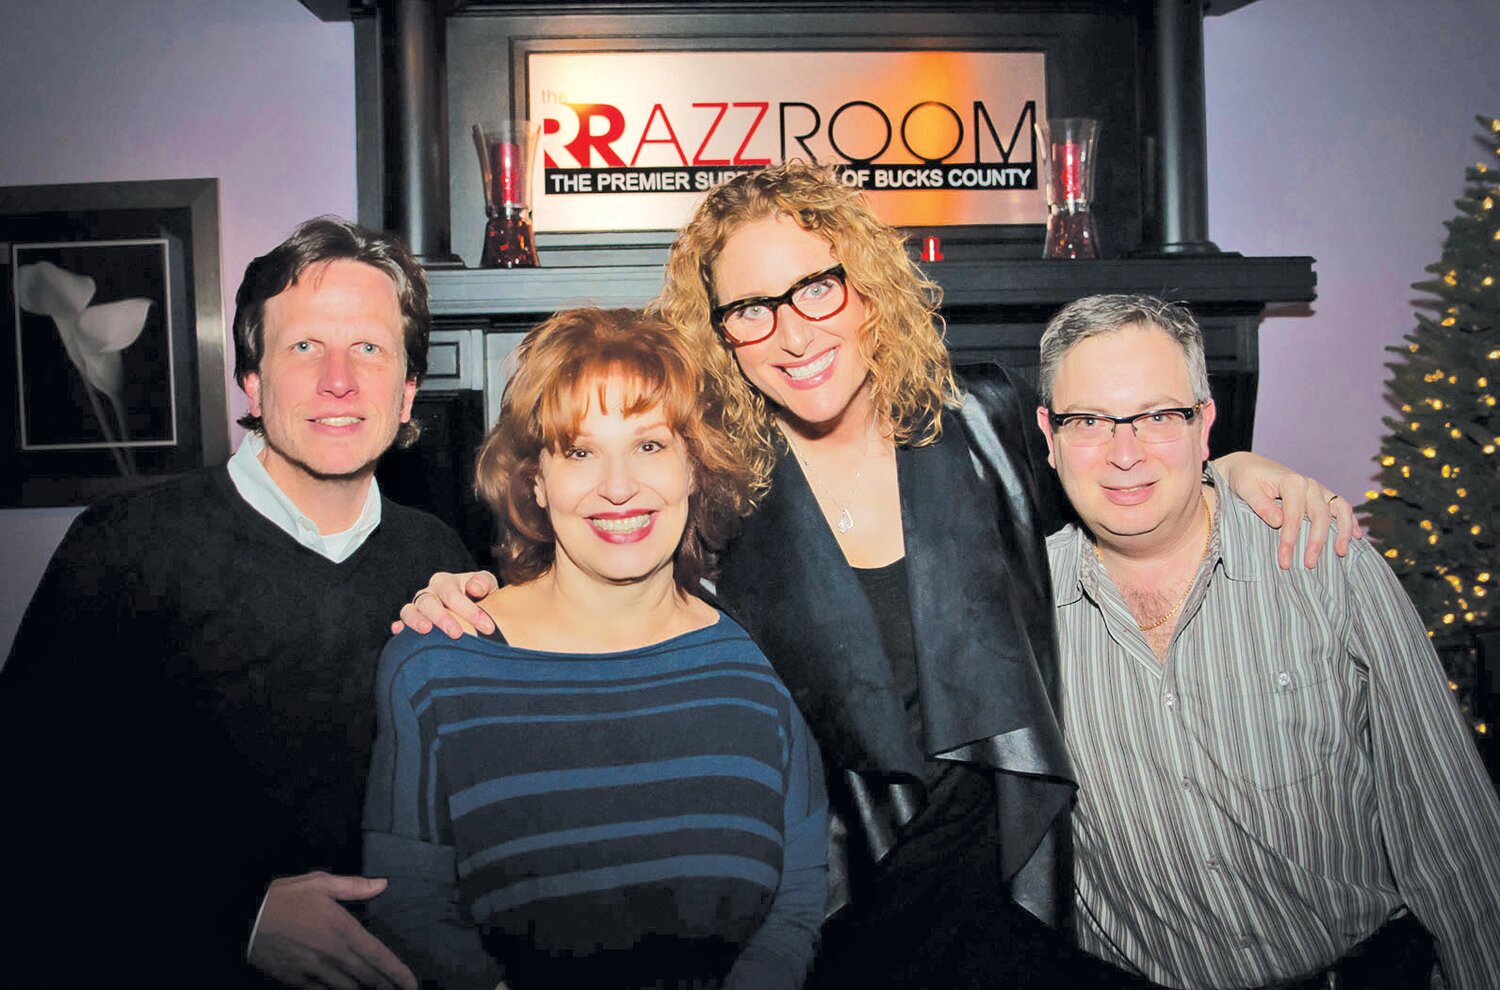 From left, Rrazz Room co-owner Robert Kotonly, comediennes Joy Behar and Judy Gold, and Rrazz Room co-owner Rory Paull pose for a photo during an event at the entertainment venue. This year marks the return of The Rrazz Room productions to  6246 Lower York Road in New Hope.